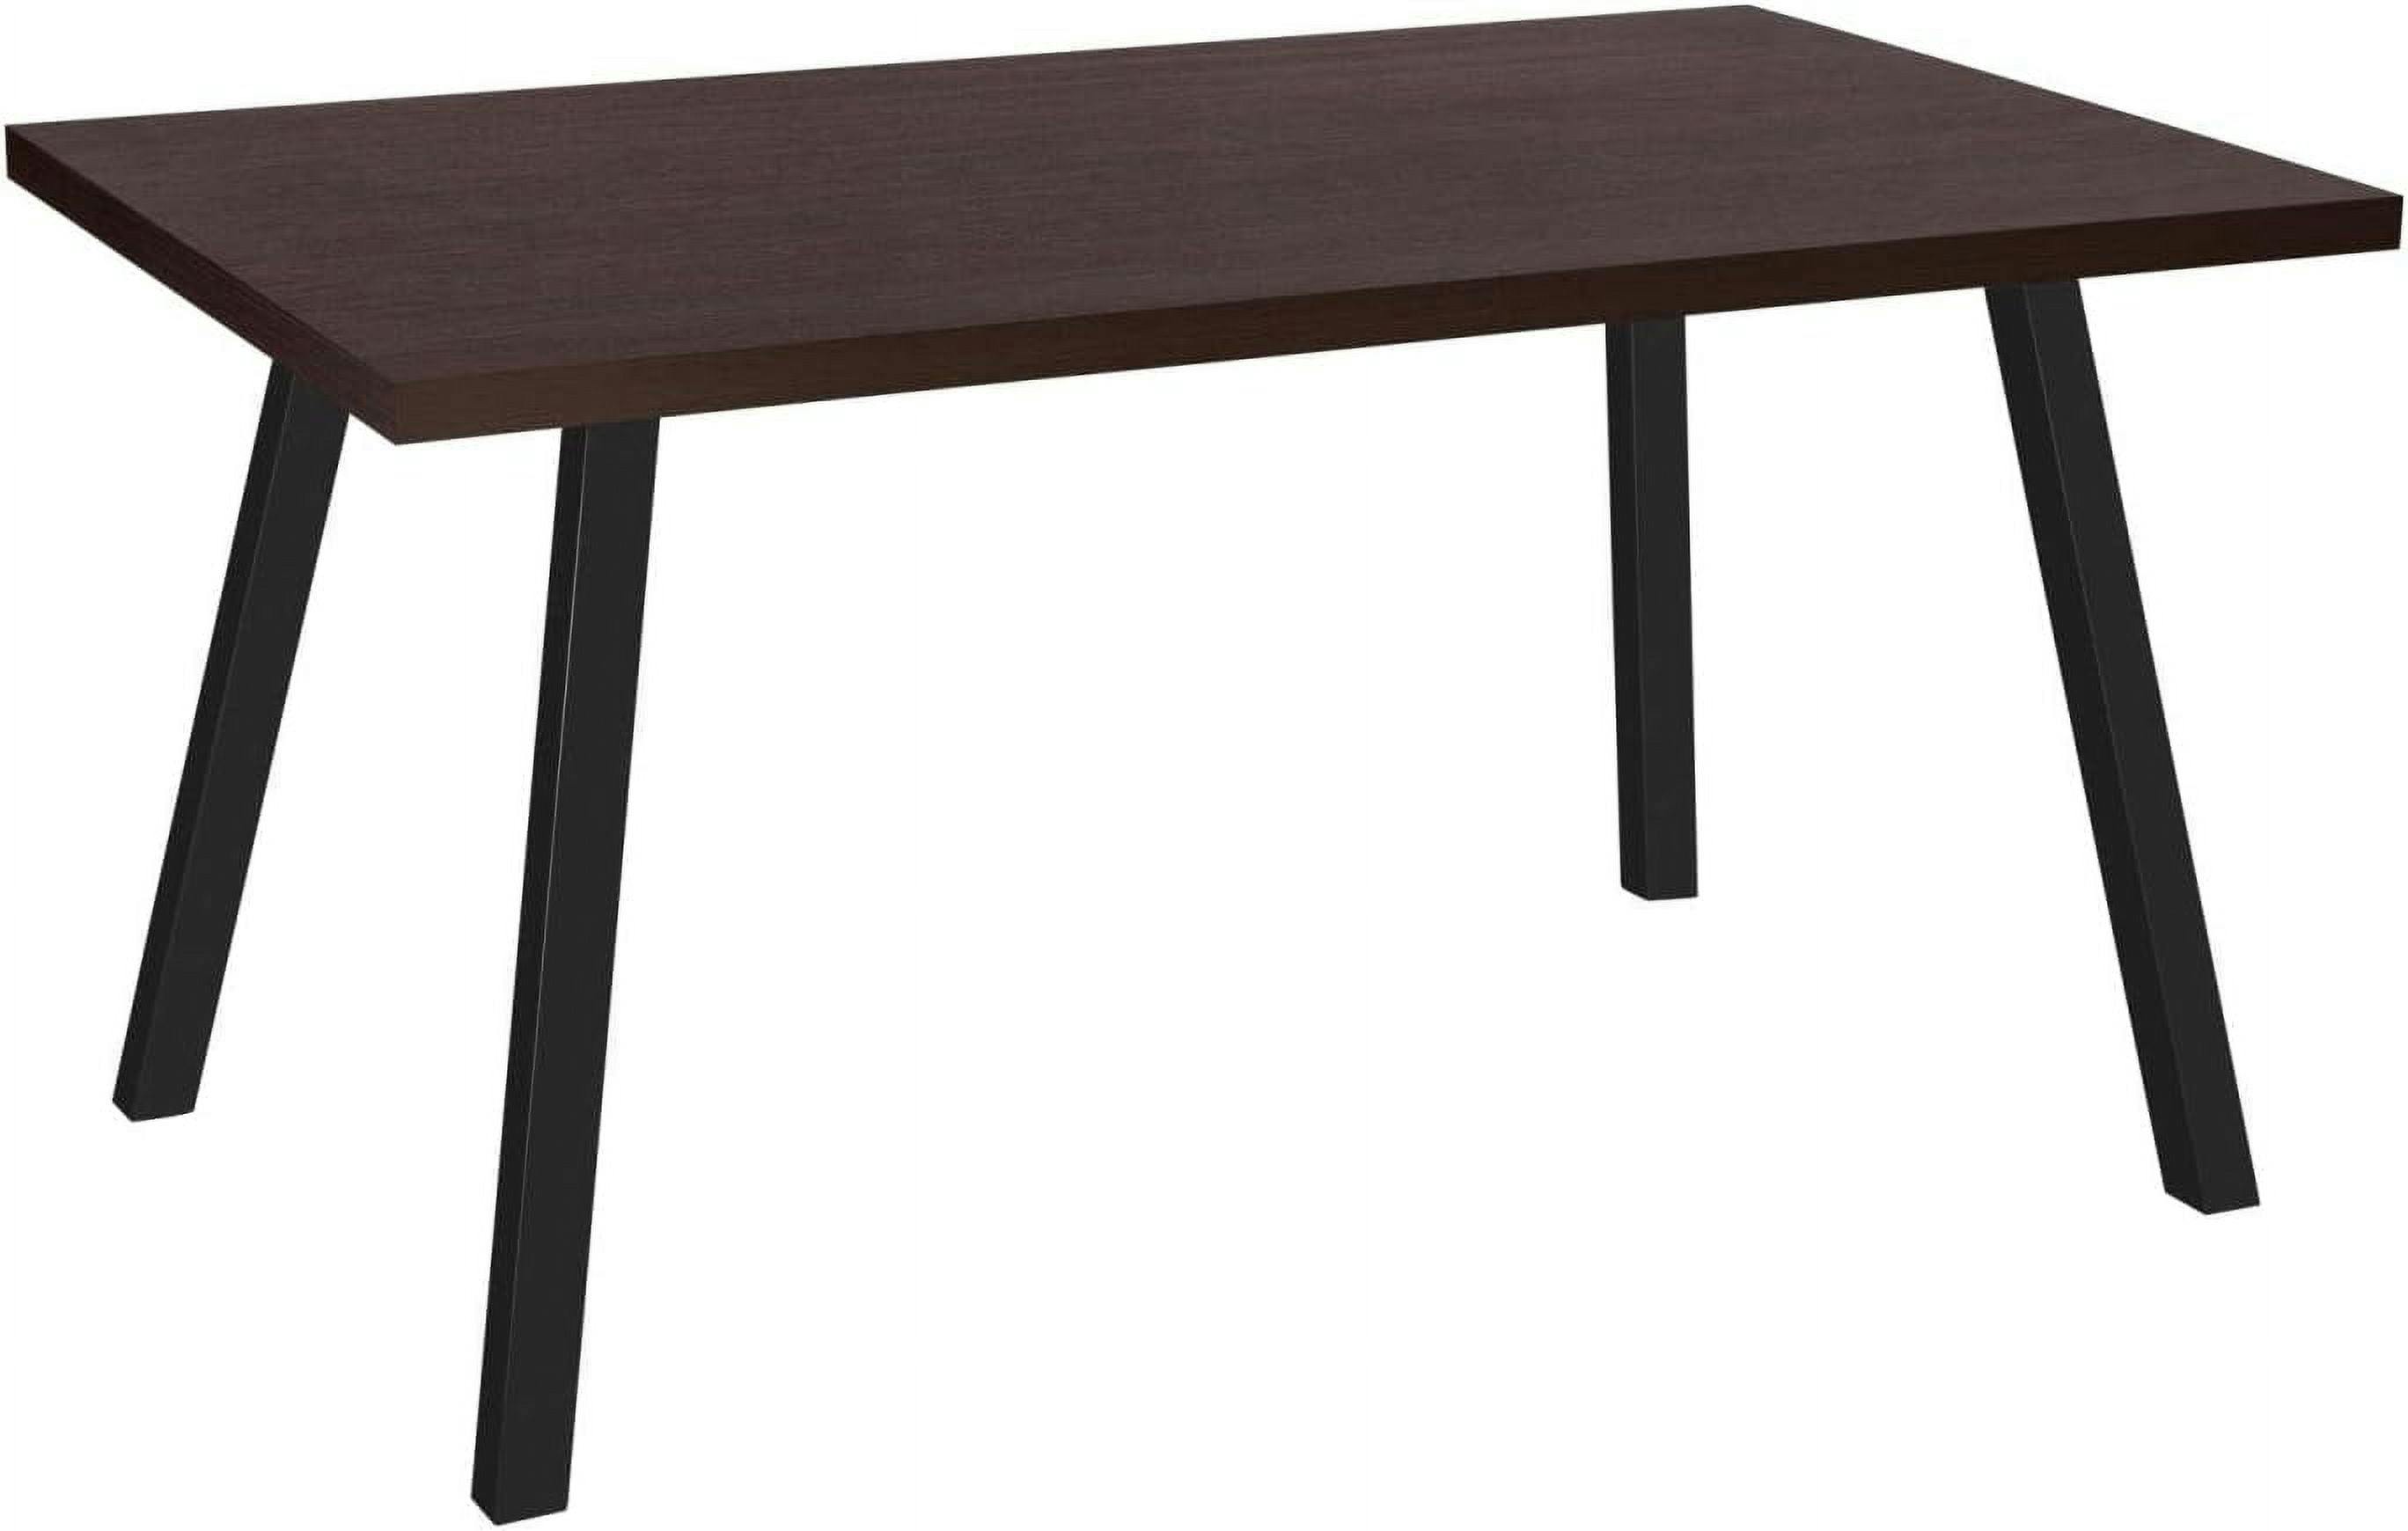 Espresso Reclaimed Wood 60" Dining Table with Black Metal Legs